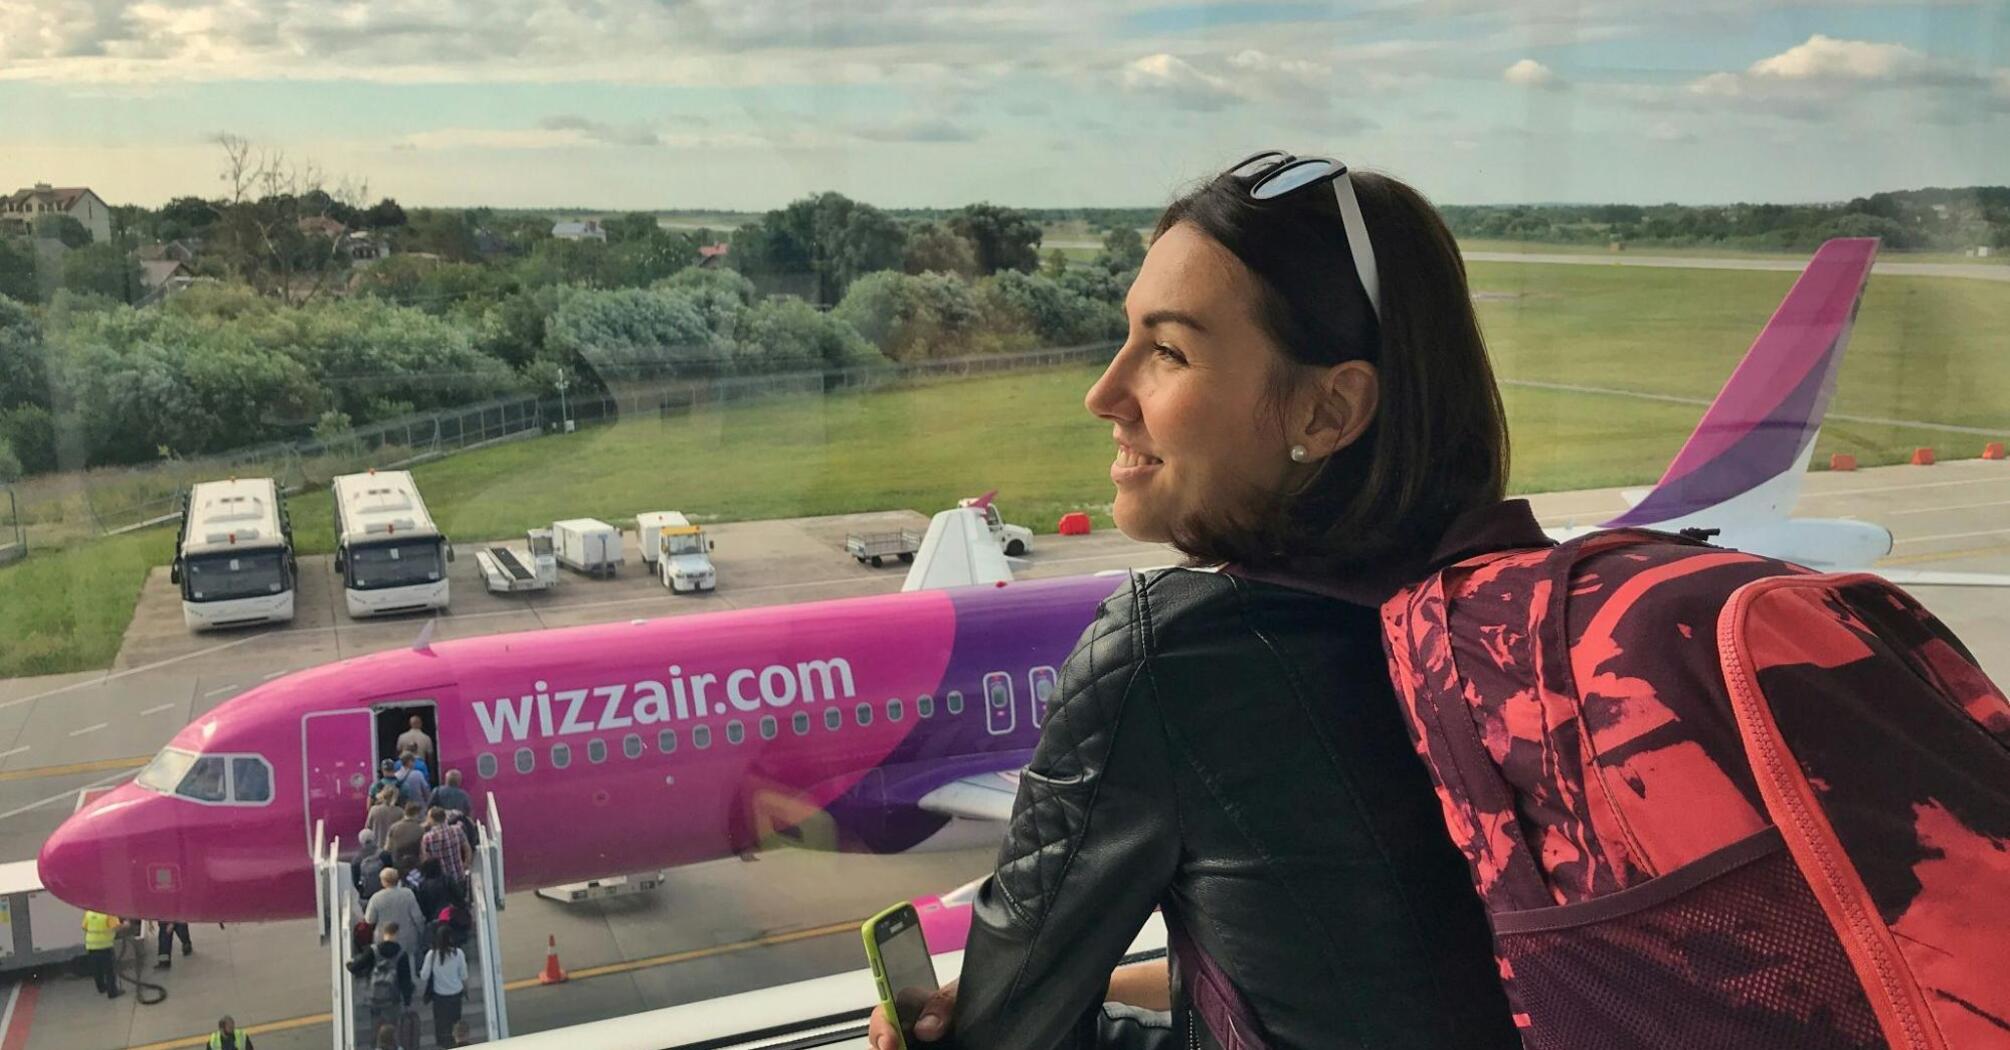 Woman waiting for boarding on Wizz Air flight